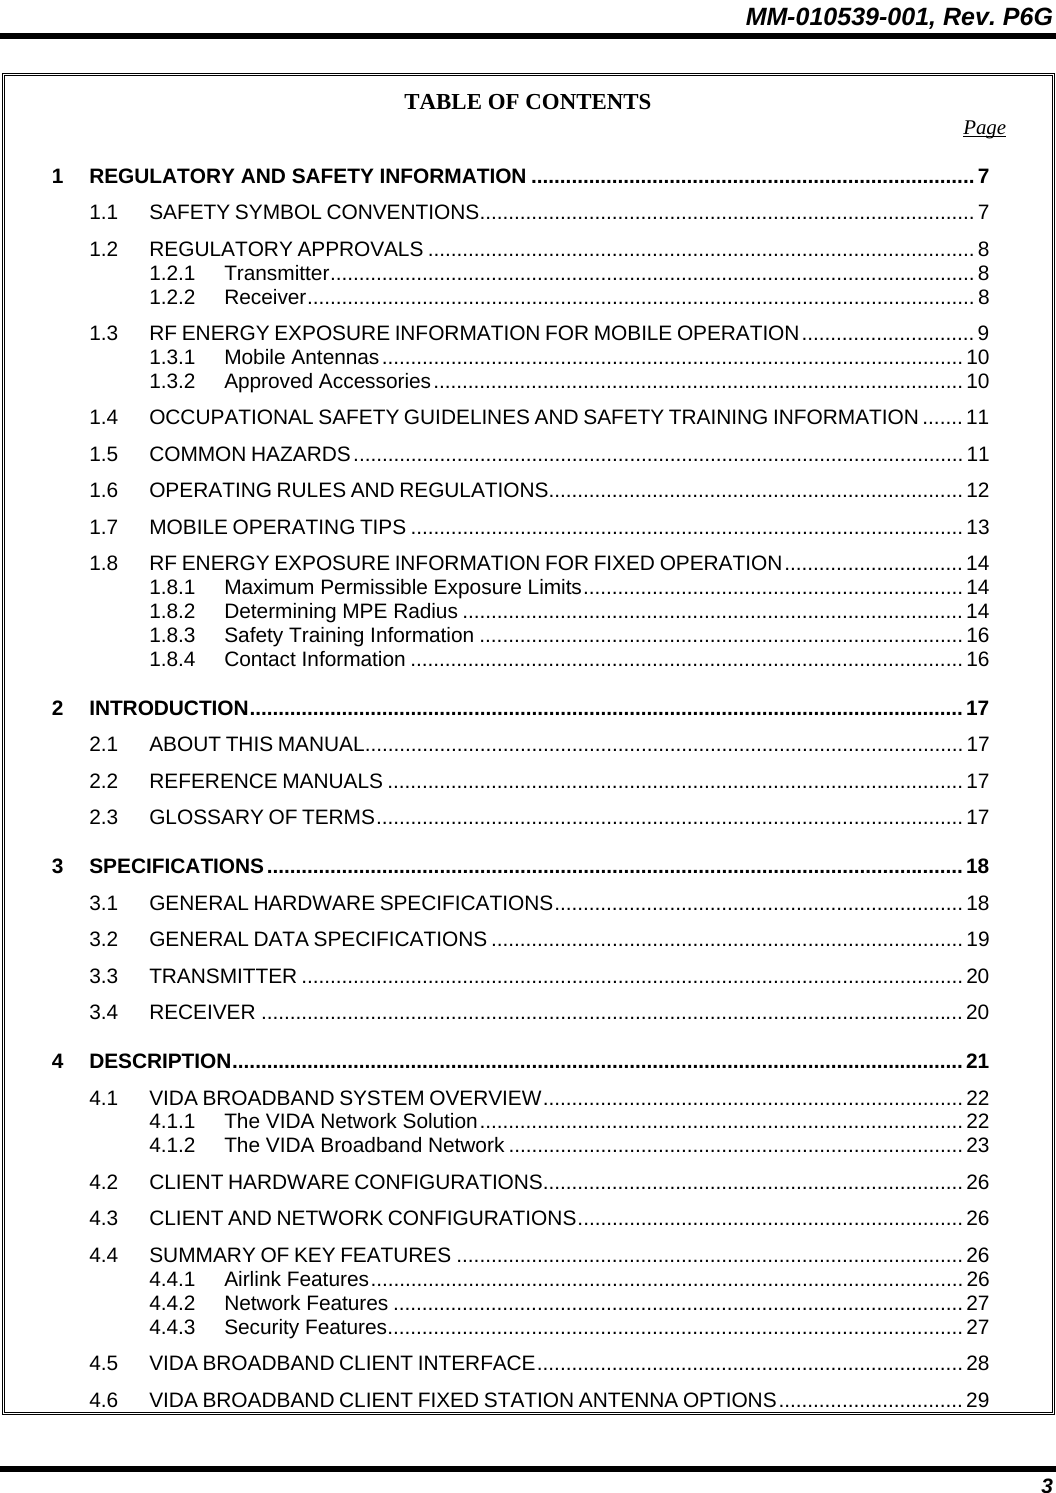 MM-010539-001, Rev. P6G  3 TABLE OF CONTENTS  Page 1 REGULATORY AND SAFETY INFORMATION .............................................................................7 1.1 SAFETY SYMBOL CONVENTIONS...................................................................................... 7 1.2 REGULATORY APPROVALS ............................................................................................... 8 1.2.1 Transmitter................................................................................................................ 8 1.2.2 Receiver.................................................................................................................... 8 1.3 RF ENERGY EXPOSURE INFORMATION FOR MOBILE OPERATION.............................. 9 1.3.1 Mobile Antennas..................................................................................................... 10 1.3.2 Approved Accessories............................................................................................10 1.4 OCCUPATIONAL SAFETY GUIDELINES AND SAFETY TRAINING INFORMATION ....... 11 1.5 COMMON HAZARDS.......................................................................................................... 11 1.6 OPERATING RULES AND REGULATIONS........................................................................ 12 1.7 MOBILE OPERATING TIPS ................................................................................................ 13 1.8 RF ENERGY EXPOSURE INFORMATION FOR FIXED OPERATION............................... 14 1.8.1 Maximum Permissible Exposure Limits.................................................................. 14 1.8.2 Determining MPE Radius ....................................................................................... 14 1.8.3 Safety Training Information .................................................................................... 16 1.8.4 Contact Information ................................................................................................ 16 2 INTRODUCTION............................................................................................................................17 2.1 ABOUT THIS MANUAL........................................................................................................ 17 2.2 REFERENCE MANUALS .................................................................................................... 17 2.3 GLOSSARY OF TERMS...................................................................................................... 17 3 SPECIFICATIONS.........................................................................................................................18 3.1 GENERAL HARDWARE SPECIFICATIONS....................................................................... 18 3.2 GENERAL DATA SPECIFICATIONS .................................................................................. 19 3.3 TRANSMITTER ................................................................................................................... 20 3.4 RECEIVER .......................................................................................................................... 20 4 DESCRIPTION...............................................................................................................................21 4.1 VIDA BROADBAND SYSTEM OVERVIEW......................................................................... 22 4.1.1 The VIDA Network Solution.................................................................................... 22 4.1.2 The VIDA Broadband Network ............................................................................... 23 4.2 CLIENT HARDWARE CONFIGURATIONS......................................................................... 26 4.3 CLIENT AND NETWORK CONFIGURATIONS................................................................... 26 4.4 SUMMARY OF KEY FEATURES ........................................................................................ 26 4.4.1 Airlink Features....................................................................................................... 26 4.4.2 Network Features ................................................................................................... 27 4.4.3 Security Features.................................................................................................... 27 4.5 VIDA BROADBAND CLIENT INTERFACE.......................................................................... 28 4.6 VIDA BROADBAND CLIENT FIXED STATION ANTENNA OPTIONS................................ 29 